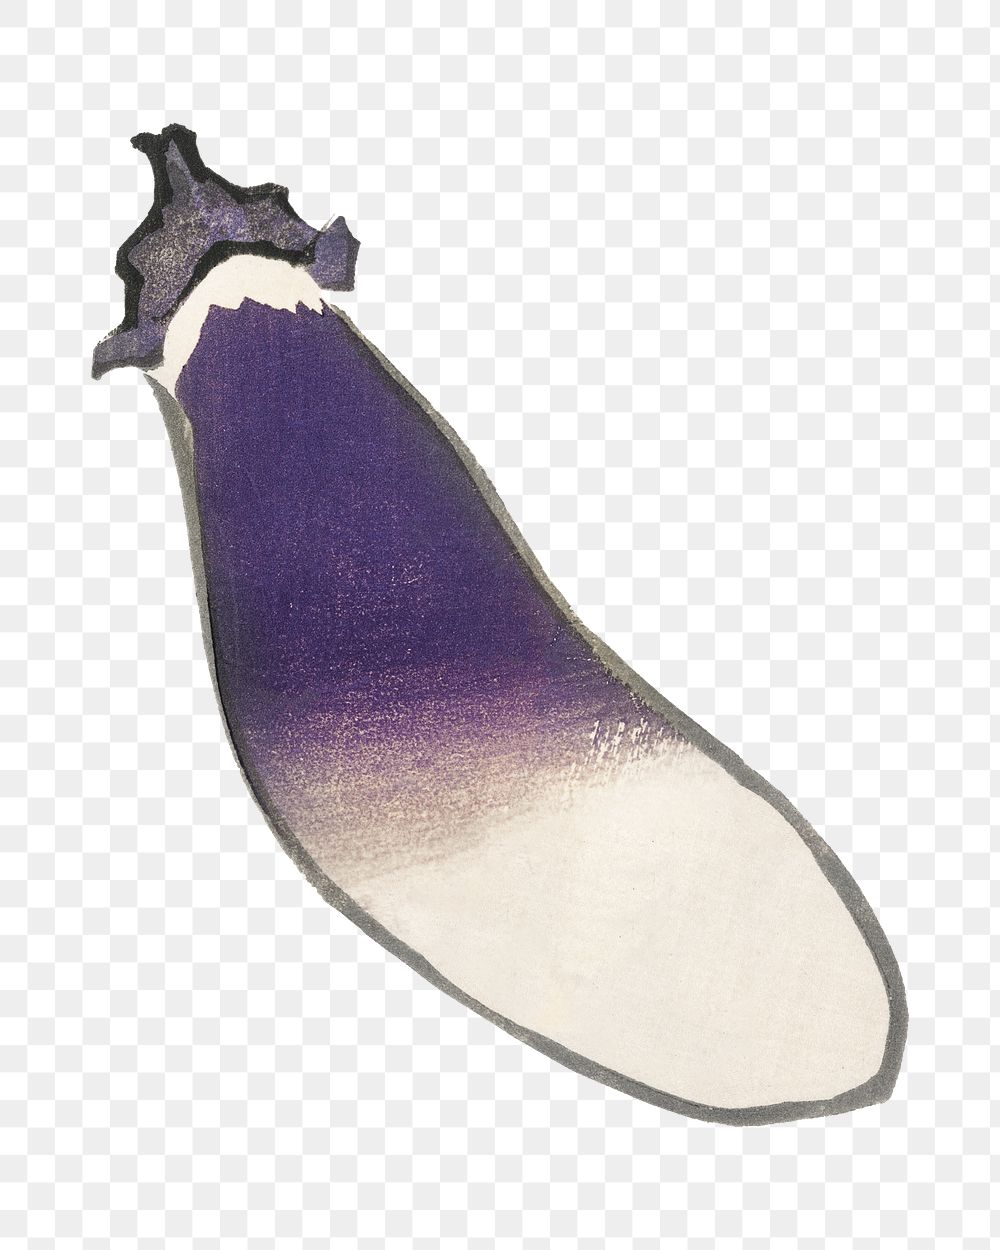 Vintage eggplant png vegetable sticker, transparent background. Remixed by rawpixel.